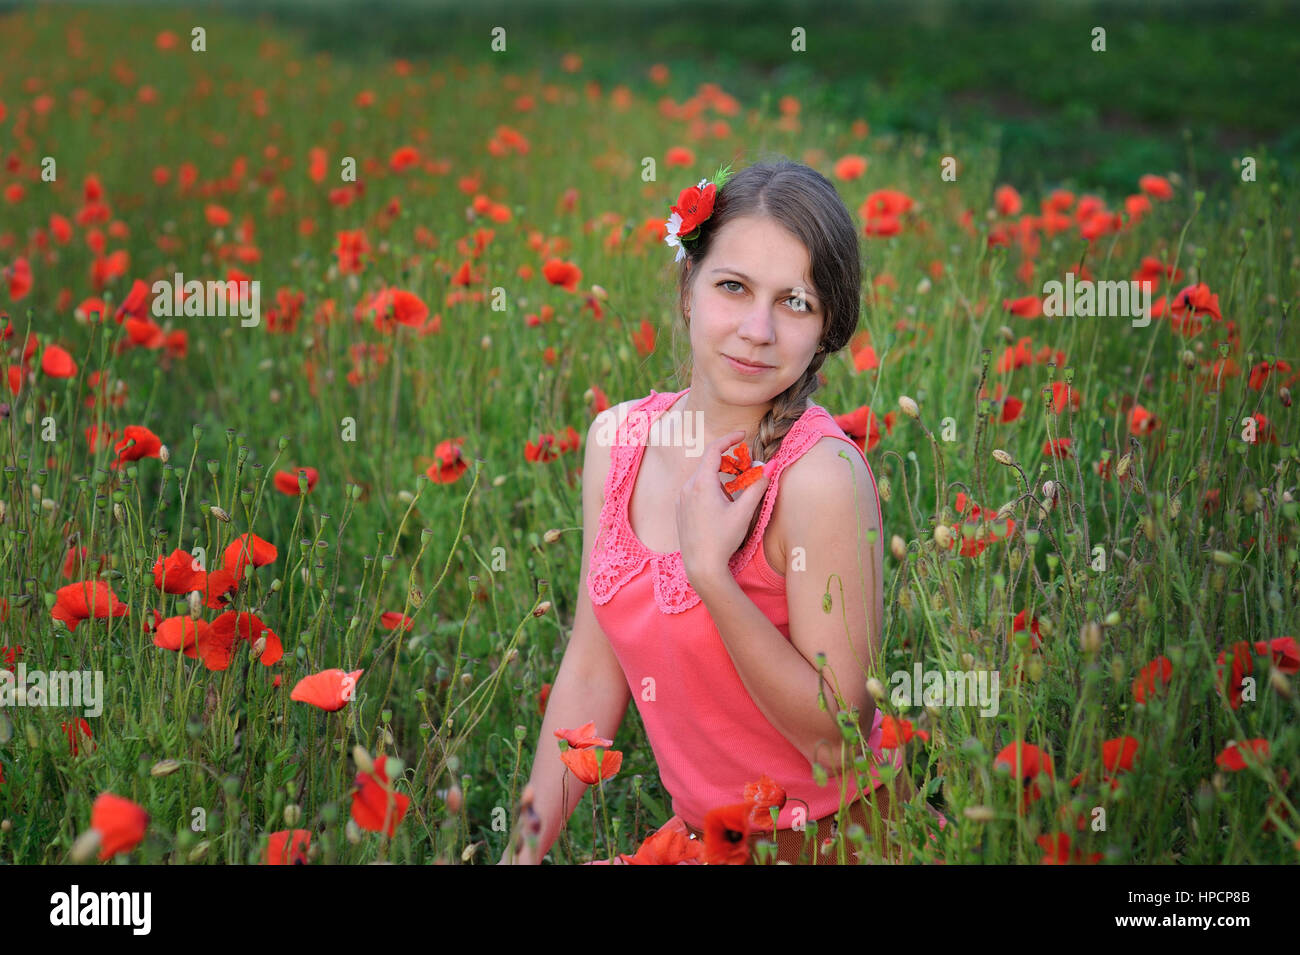 young beautiful woman in red dress sitting in a poppy field. Stock Photo